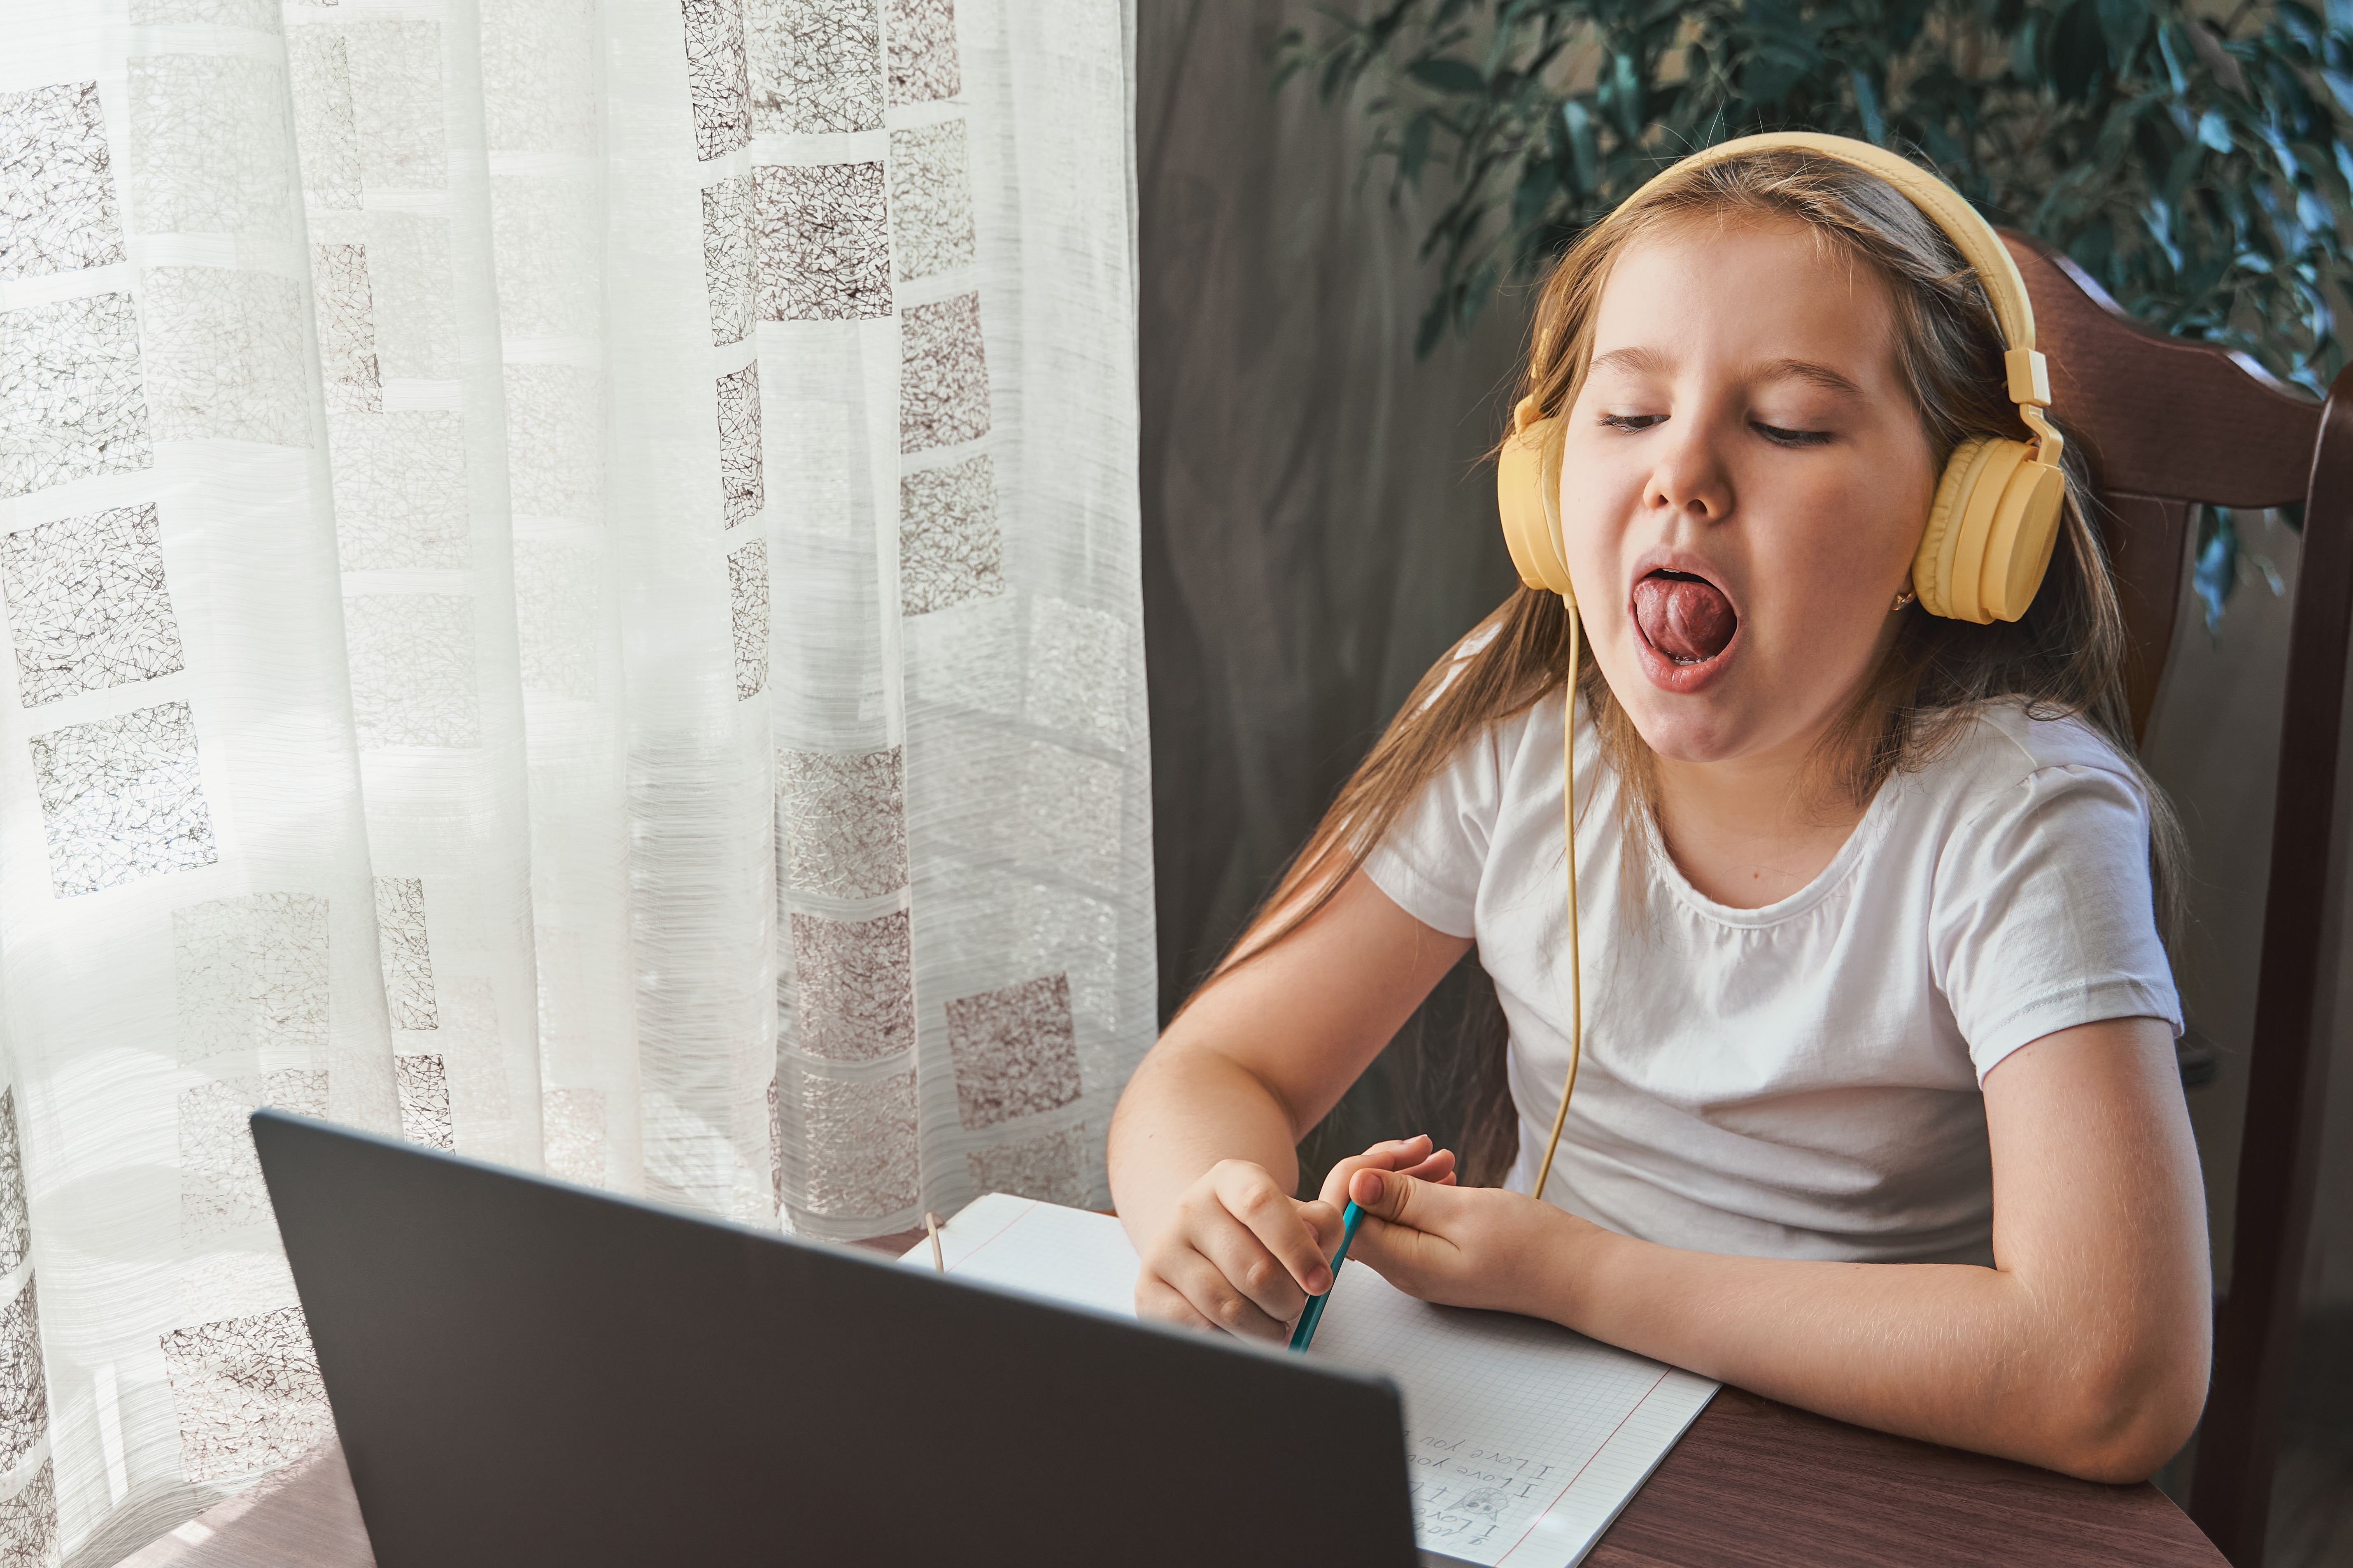 Speech training concept. Little girl uses a laptop to study at home with a teacher